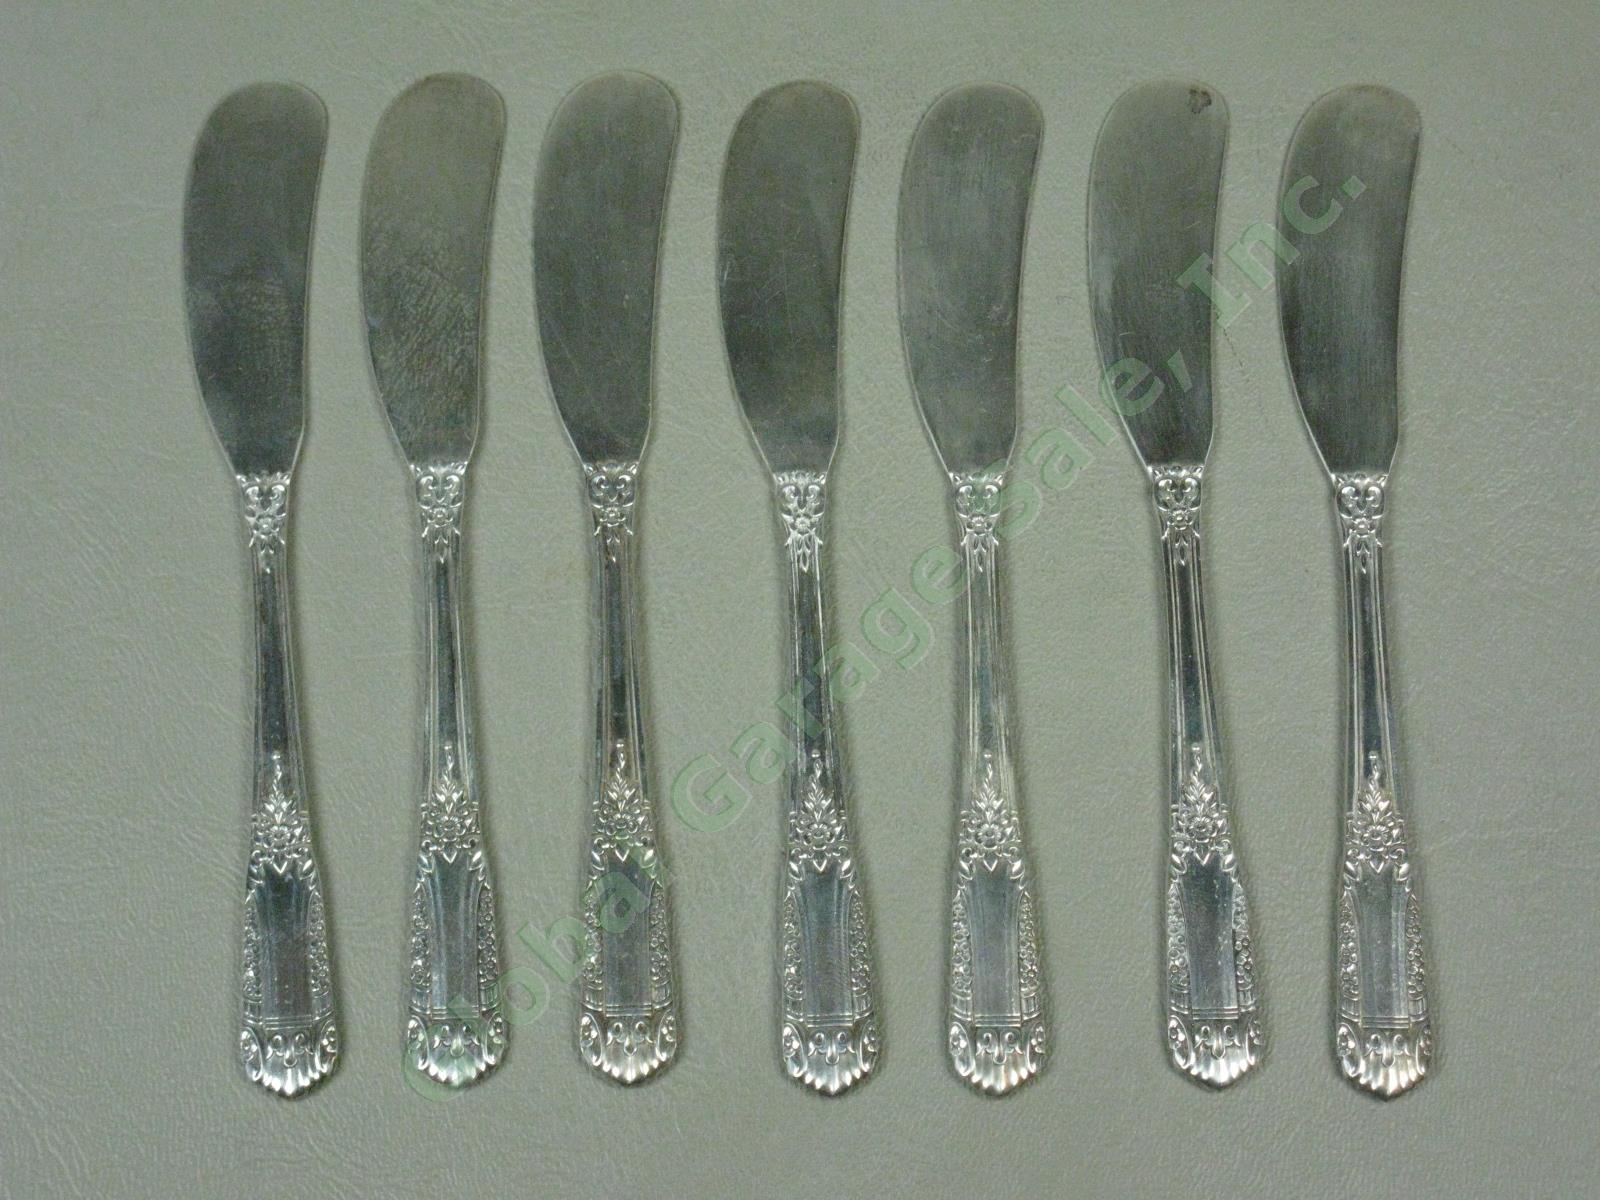 7 State House Inaugural Sterling Silver Butter Knives Silverware Flatware Set NR 3